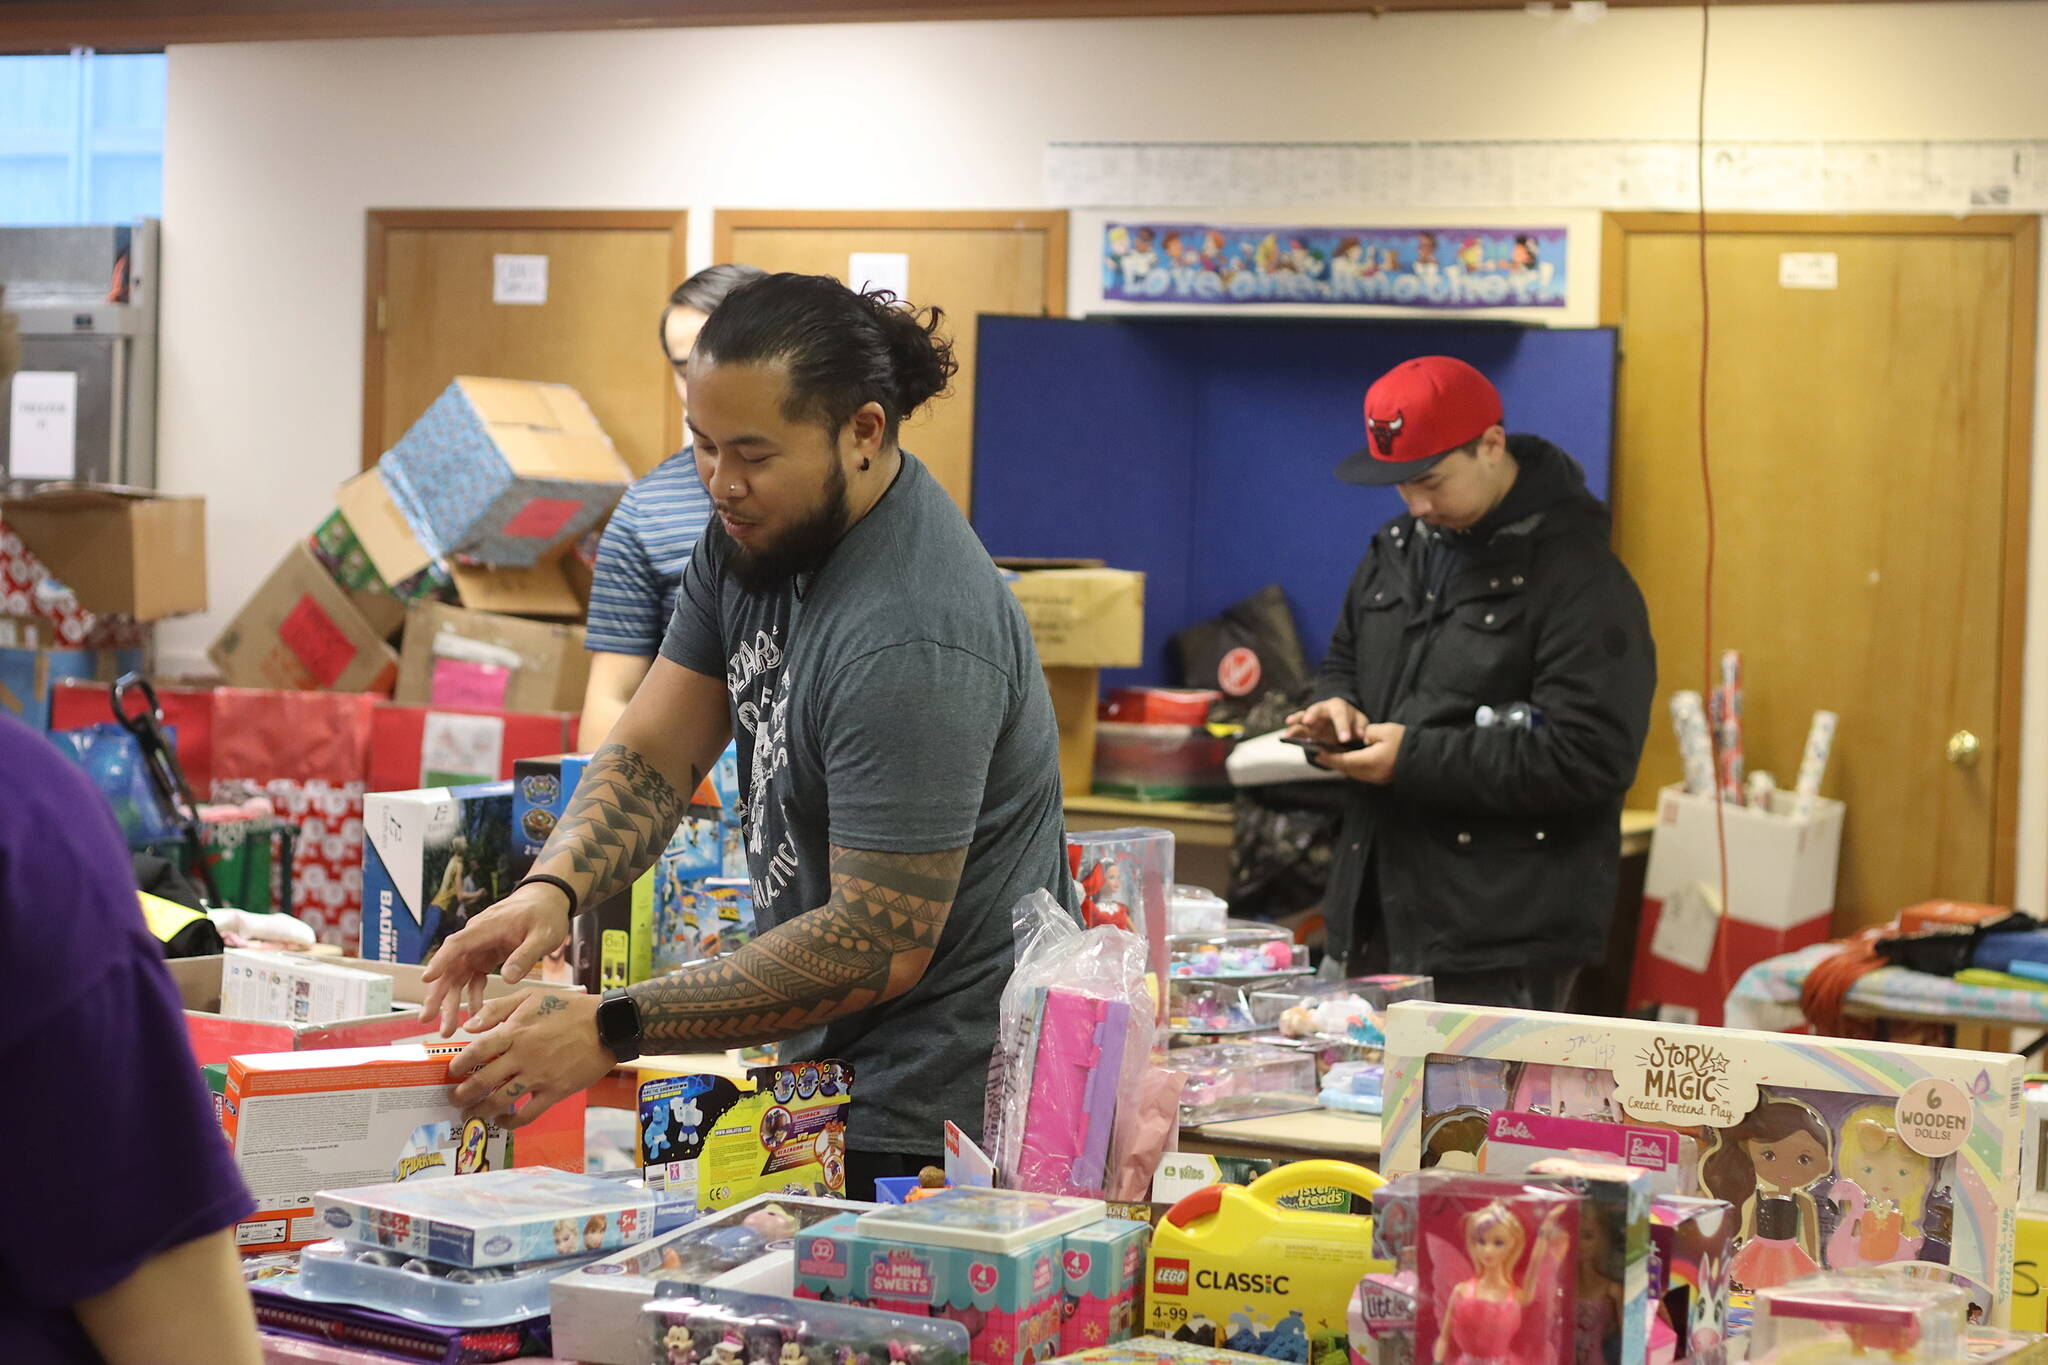 A volunteer selects donated toys for a recipient during The Salvation Army’s food and gift giveaway Saturday at its church and administrative office downtown. St. Vincent de Paul in Juneau is hosting its Adopt-A-Family gift giveaway this week, but had to stop accepting wish lists from families early due to higher-than-usual demand, according to Director Dave Ringle. People interested in helping a family can contact the organization by Thursday, (Mark Sabbatini / Juneau Empire)